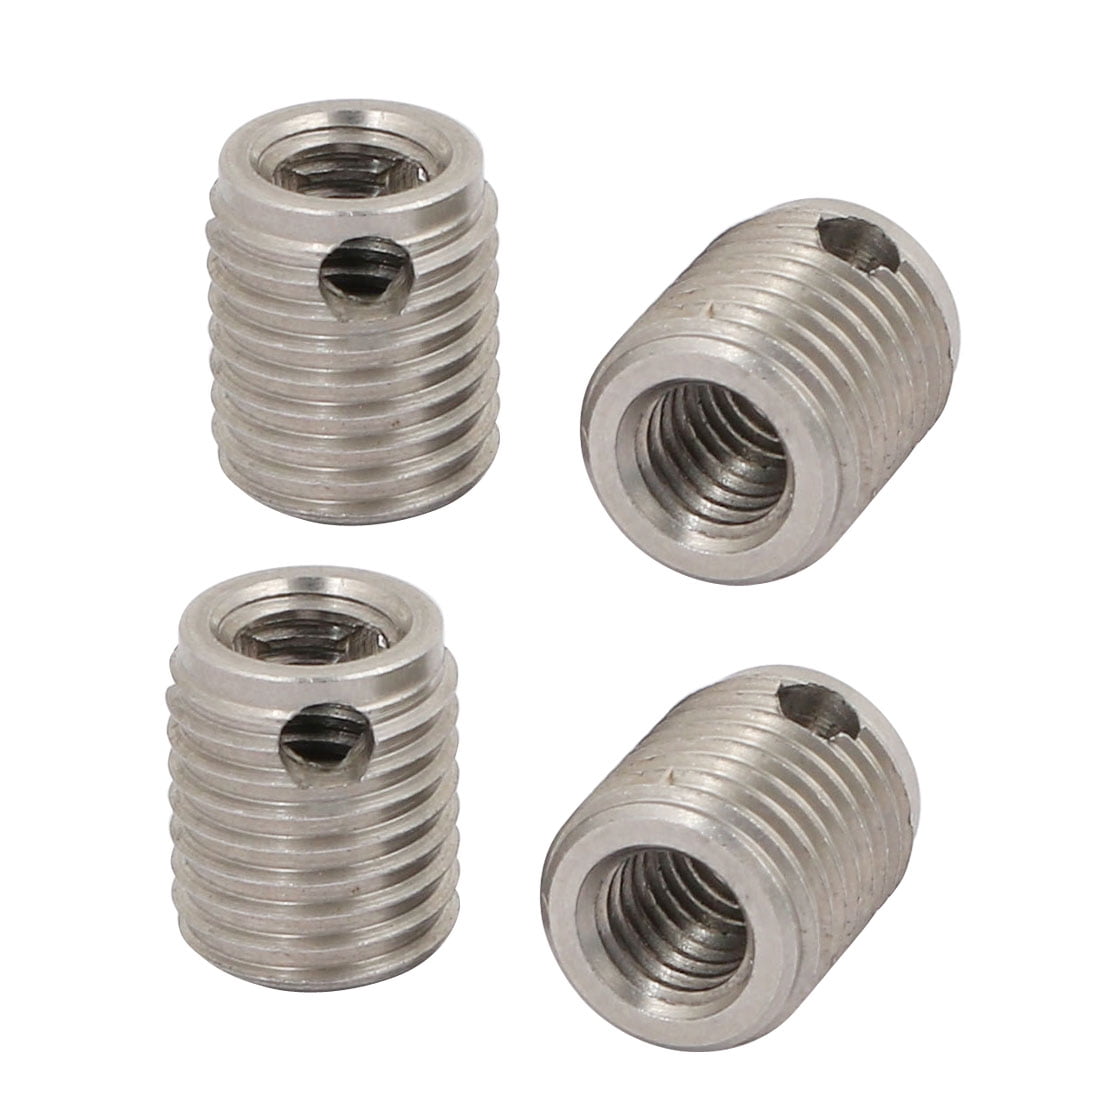 Stainless Steel M6 Inserts